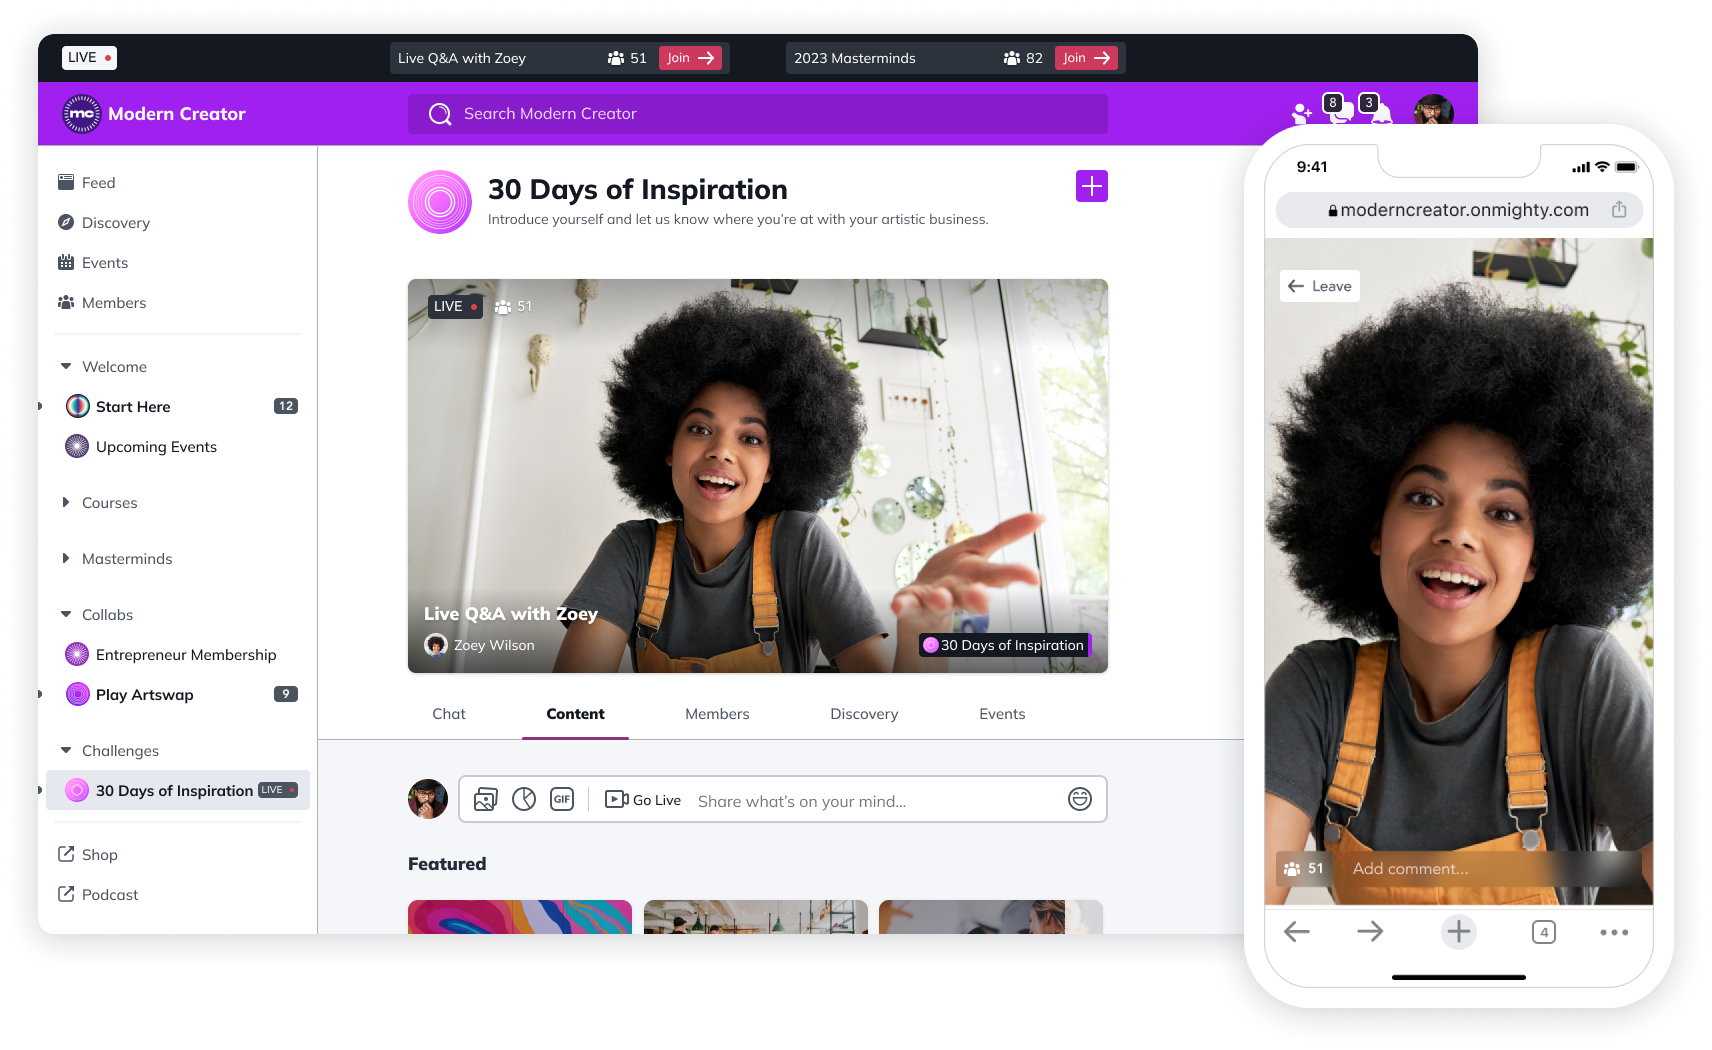 Go live—no integrations required. Livestreaming brings a whole new level of engagement to your community. Every Space you create has the option to livestream. You can livestream your courses, community events, conference keynotes, and paid workshops.